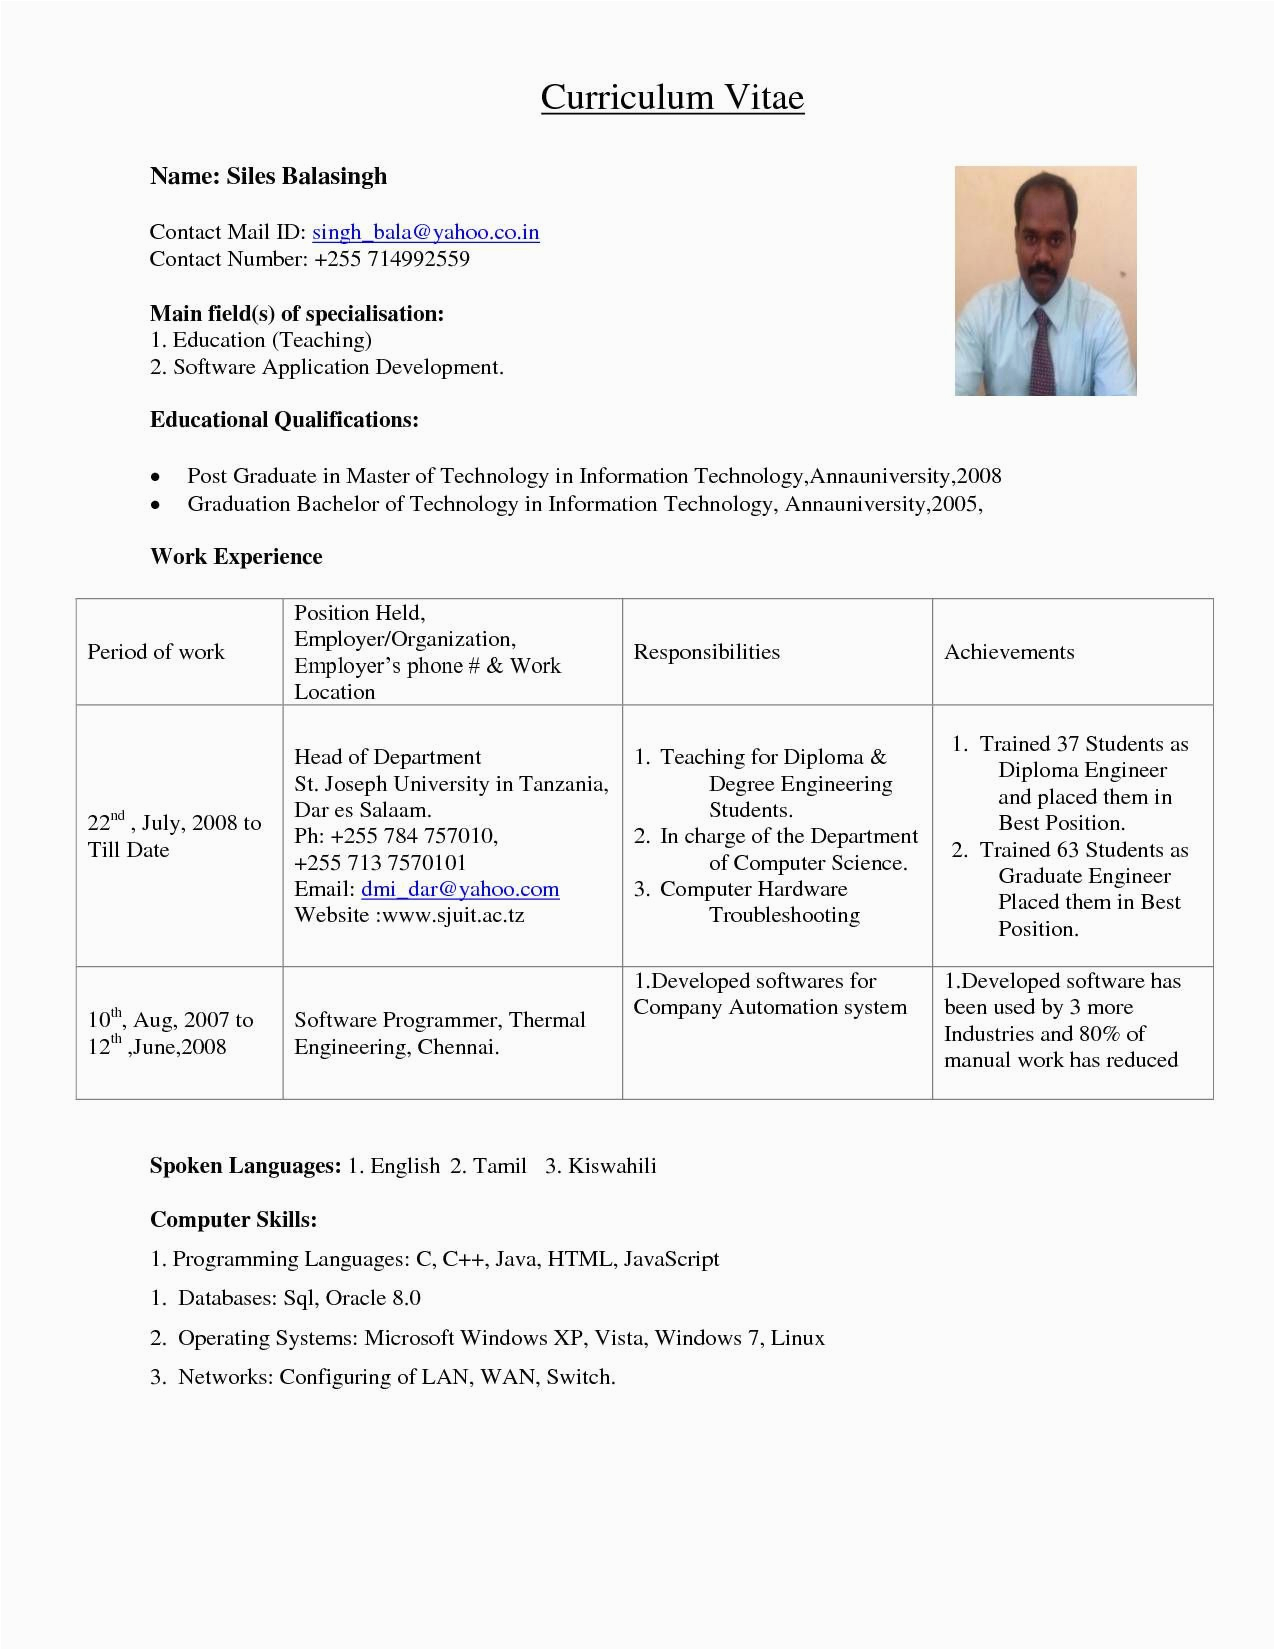 Resume Samples for asst Professor In Engineering College Resume format for Lecturer Job In Engineering College Paycheck Stubs